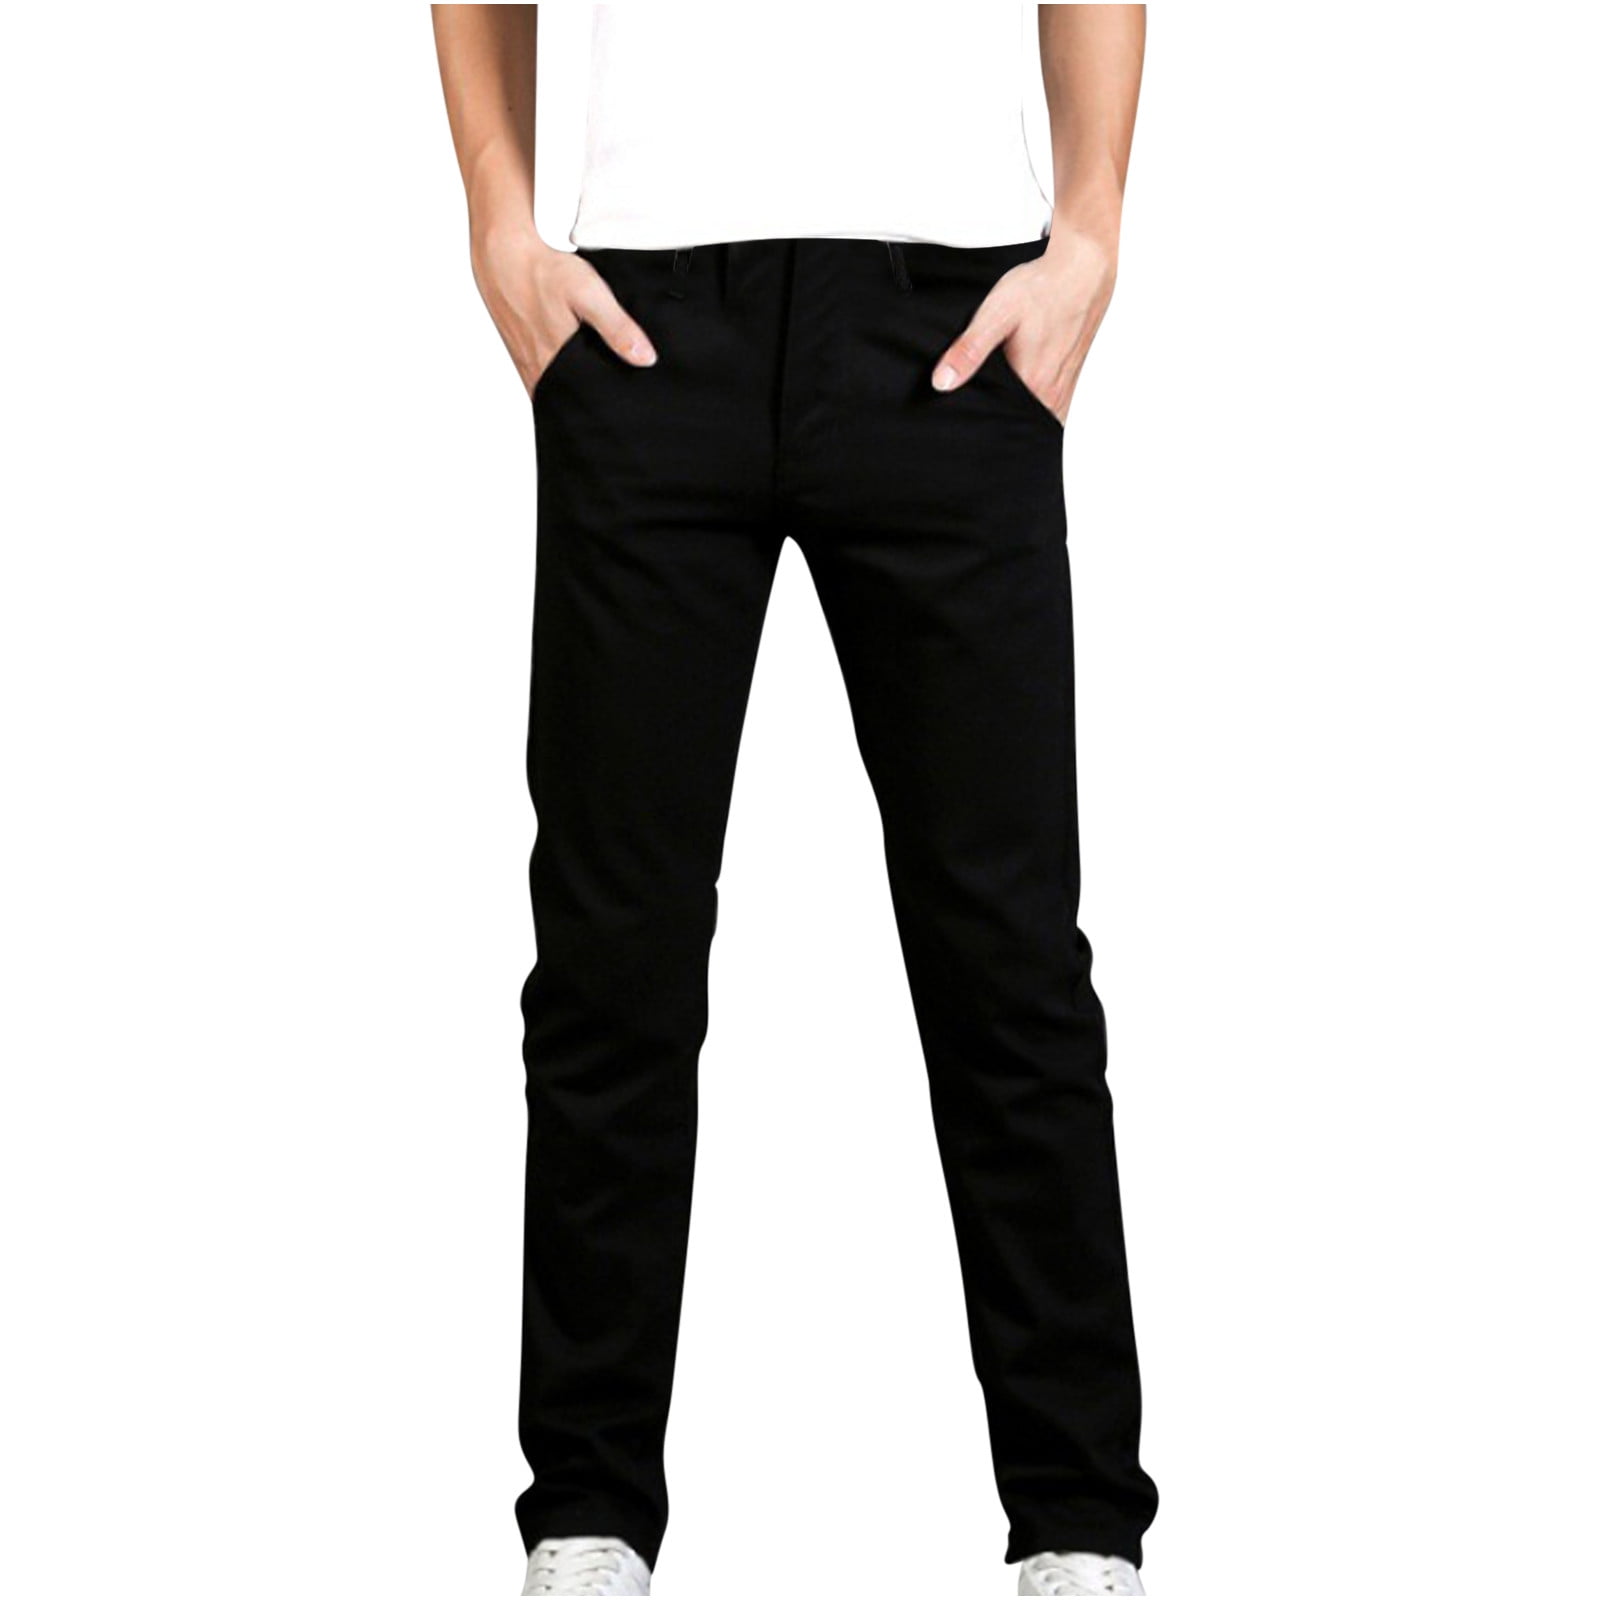 Enzo Cargo Trousers Mens Slim Fit Combat Chinos Cotton Stretch Work Pants |  eBay